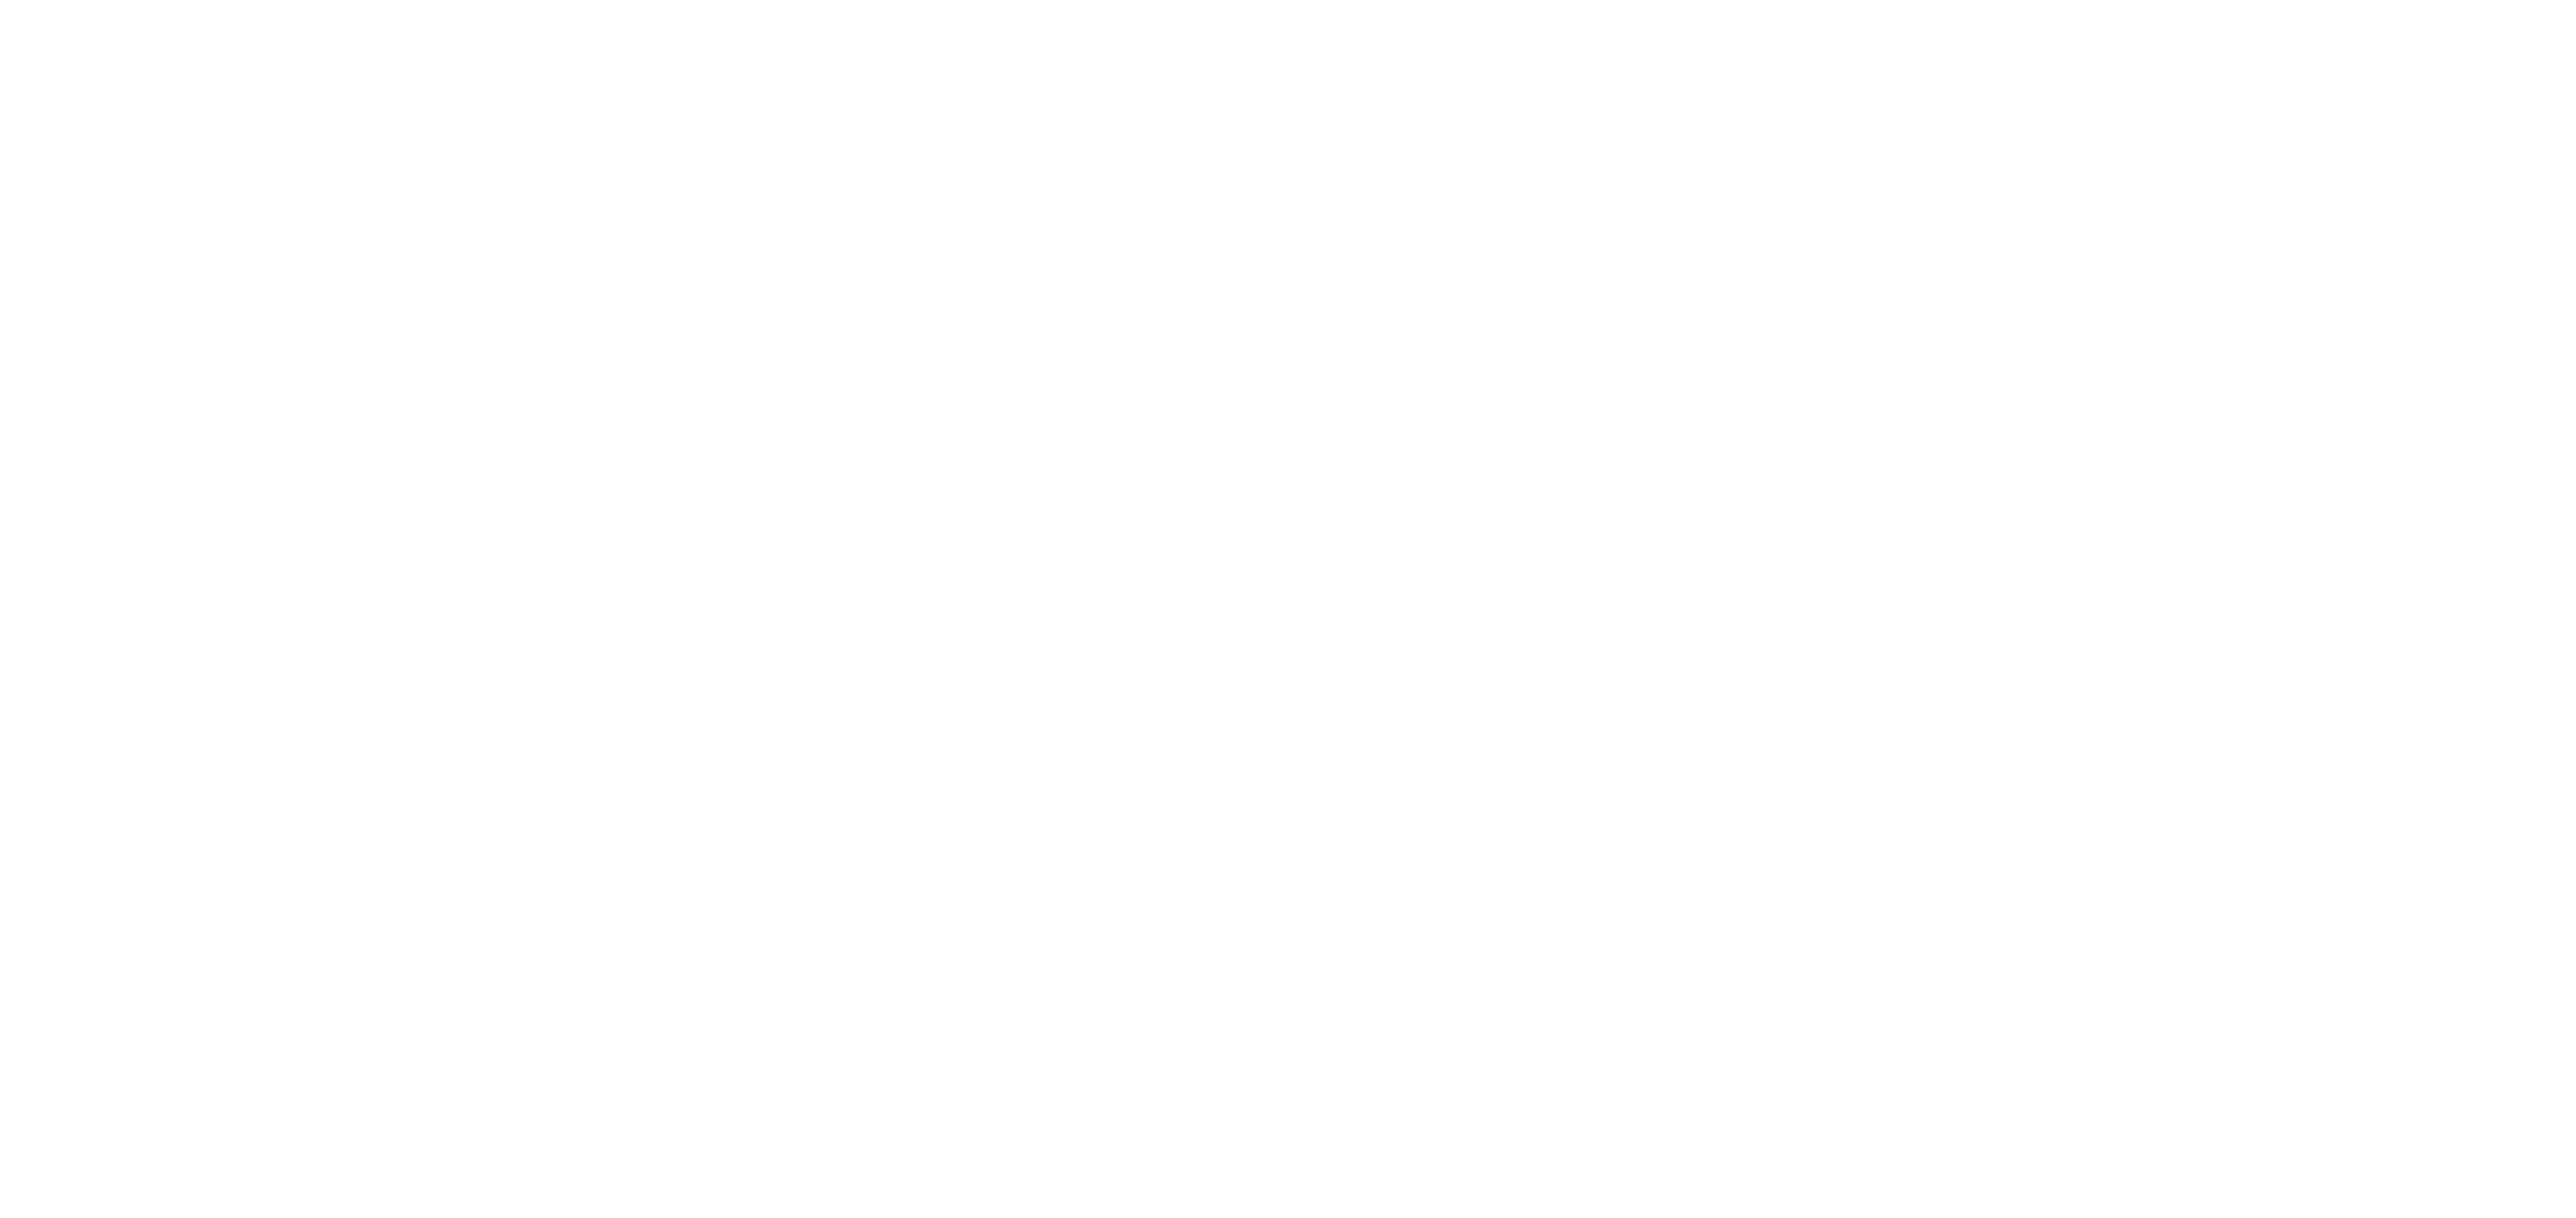 Blended Meeting to Rising of Young CAS Researches and Students to Survive COVID-19 Pandemic